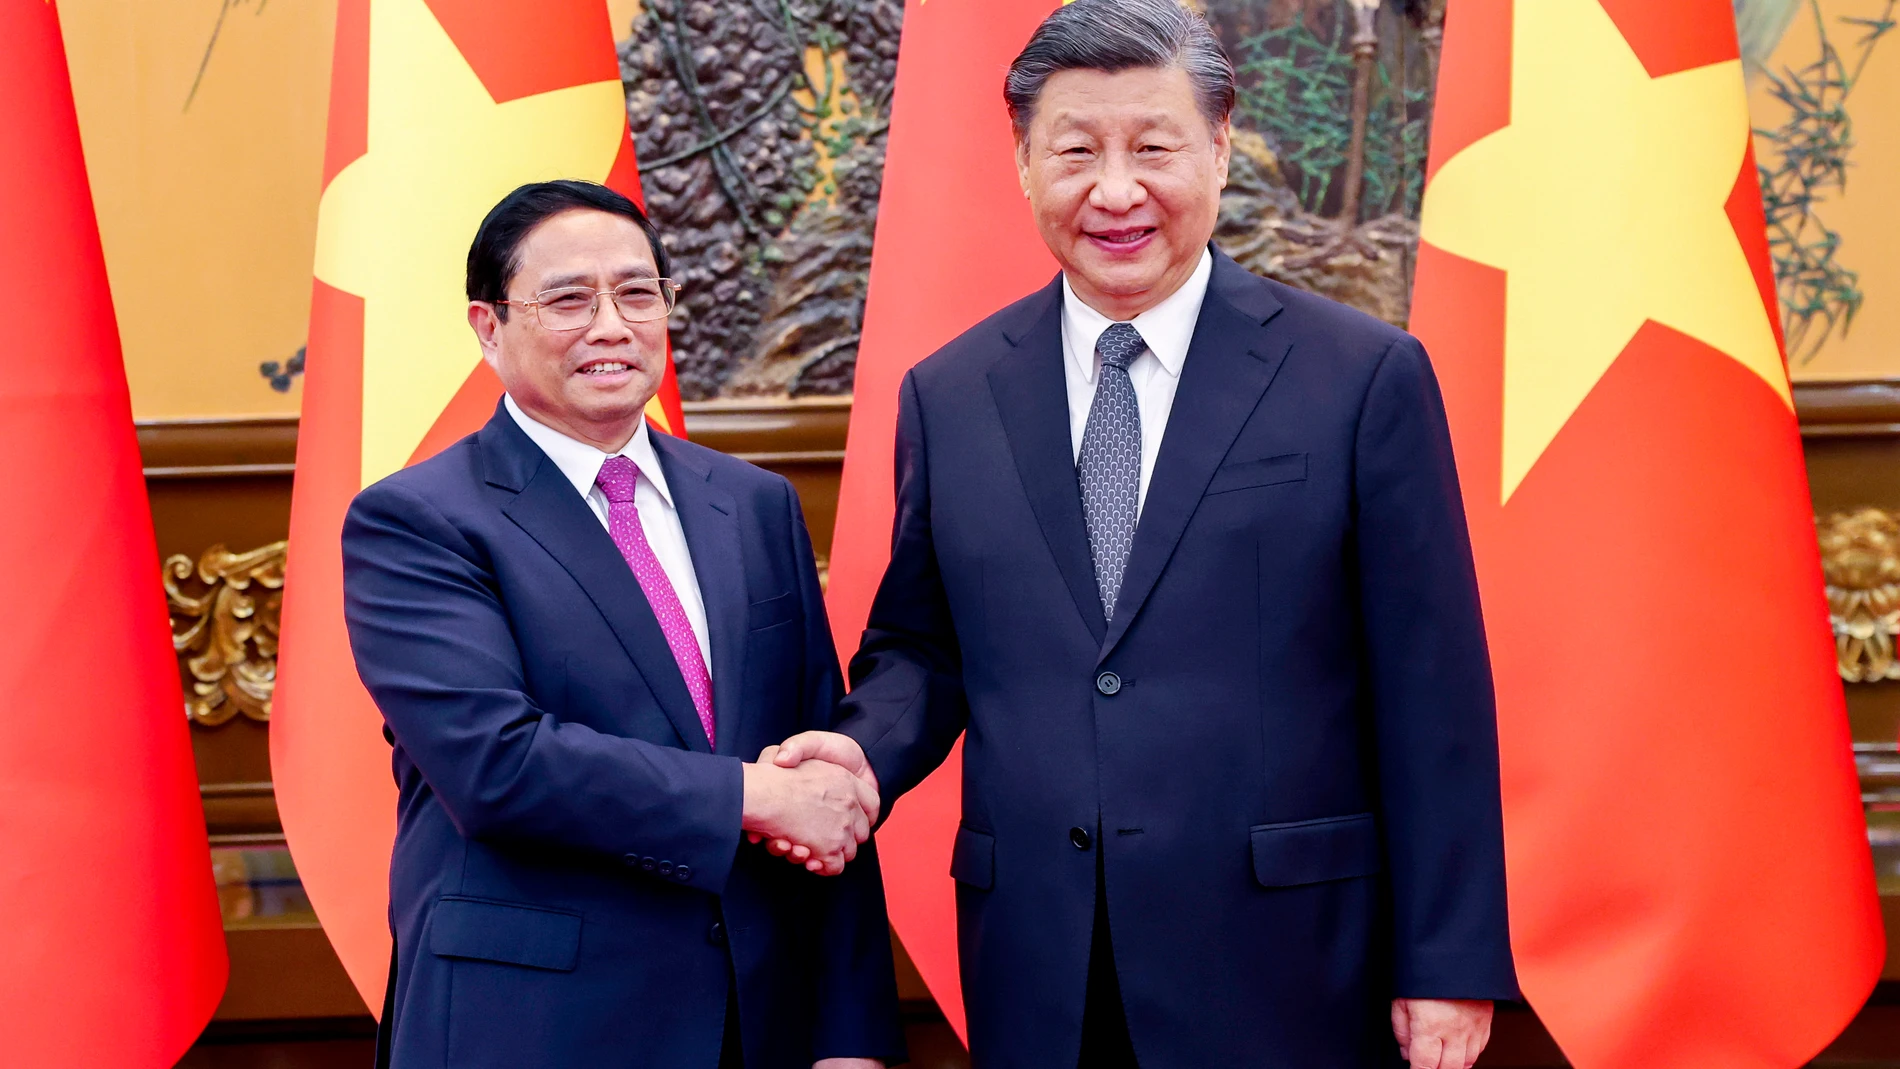 Beijing (China), 27/06/2023.- Chinese President Xi Jinping meets with Prime Minister of Vietnam Pham Minh Chinh at the Great Hall of the People in Beijing, China, 27 June 2023. EFE/EPA/XINHUA / Yao Dawei CHINA OUT / UK AND IRELAND OUT / MANDATORY CREDIT EDITORIAL USE ONLY 